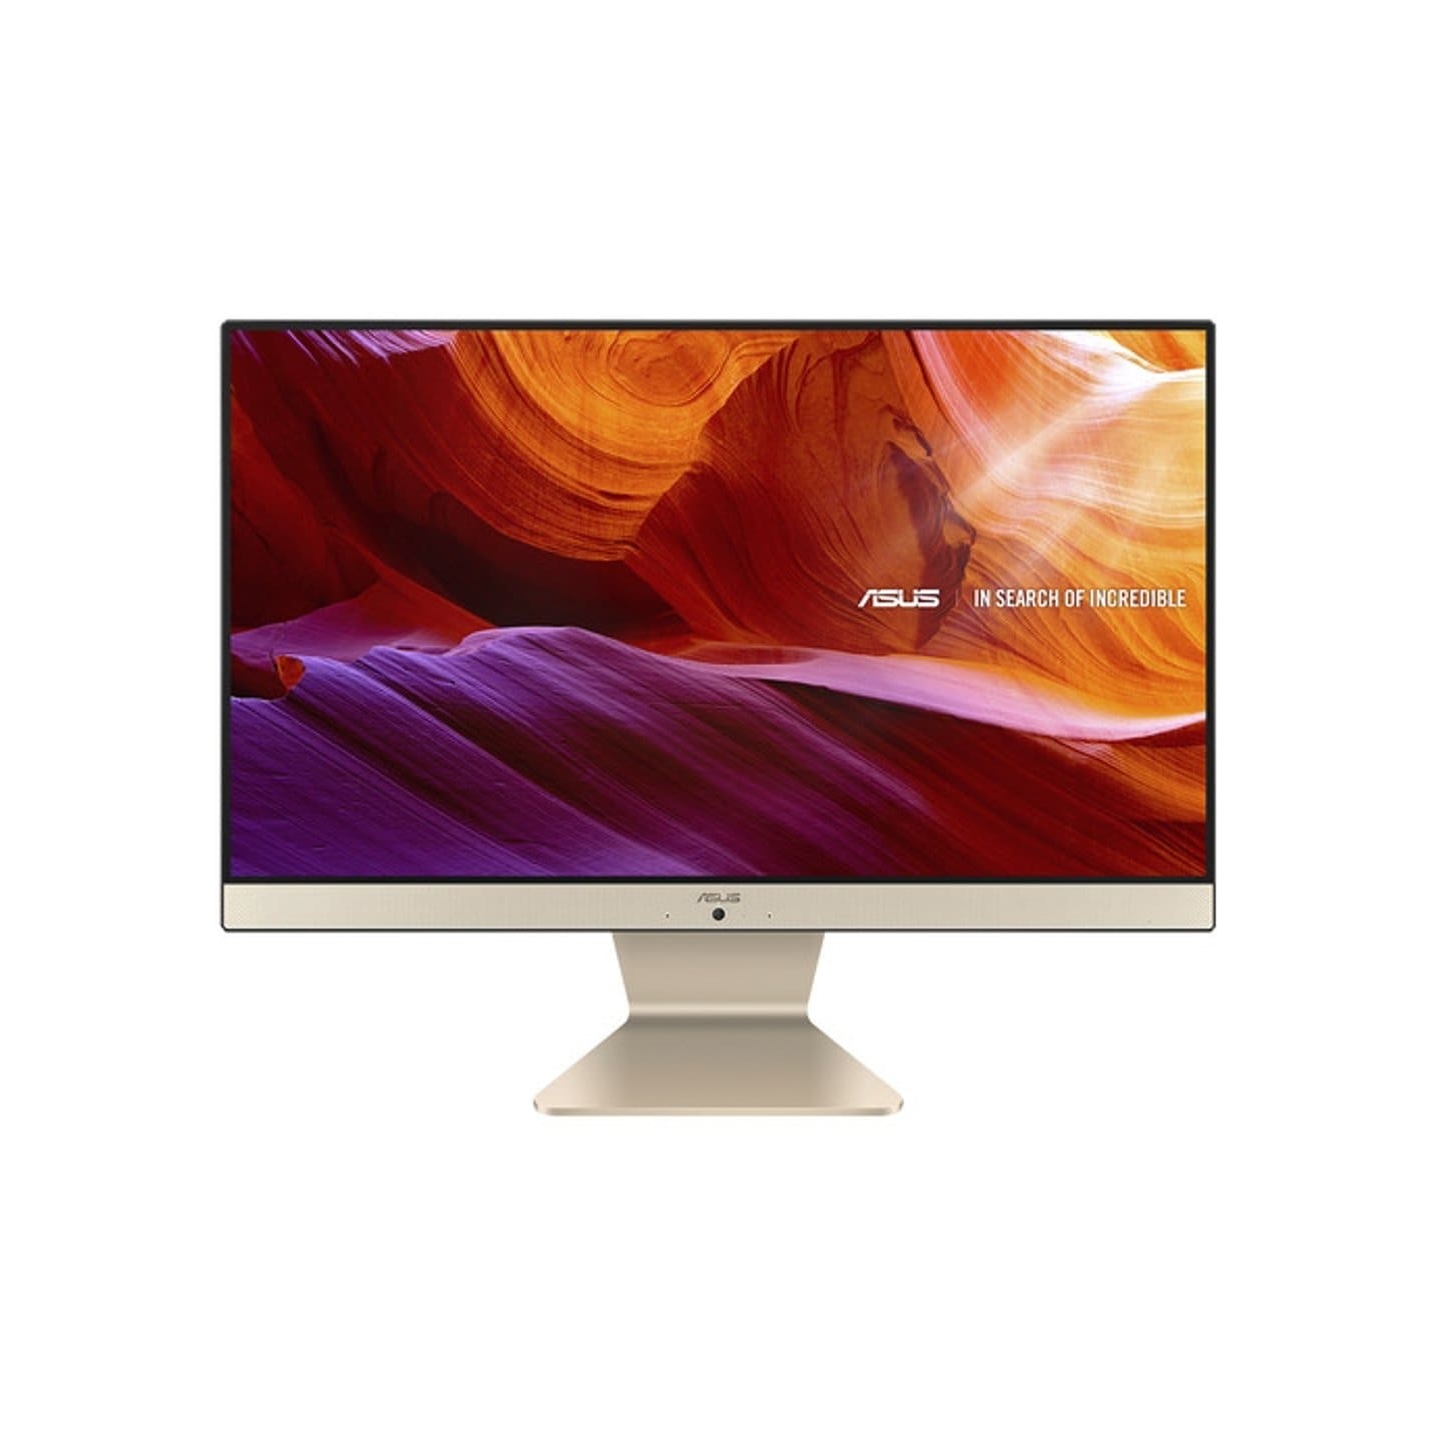 ASUS V222FAK-BA025M I5-10210U 8GB 256GB SSD 21.5" FHD NONTOUCH FDOS ALL IN ONE PC